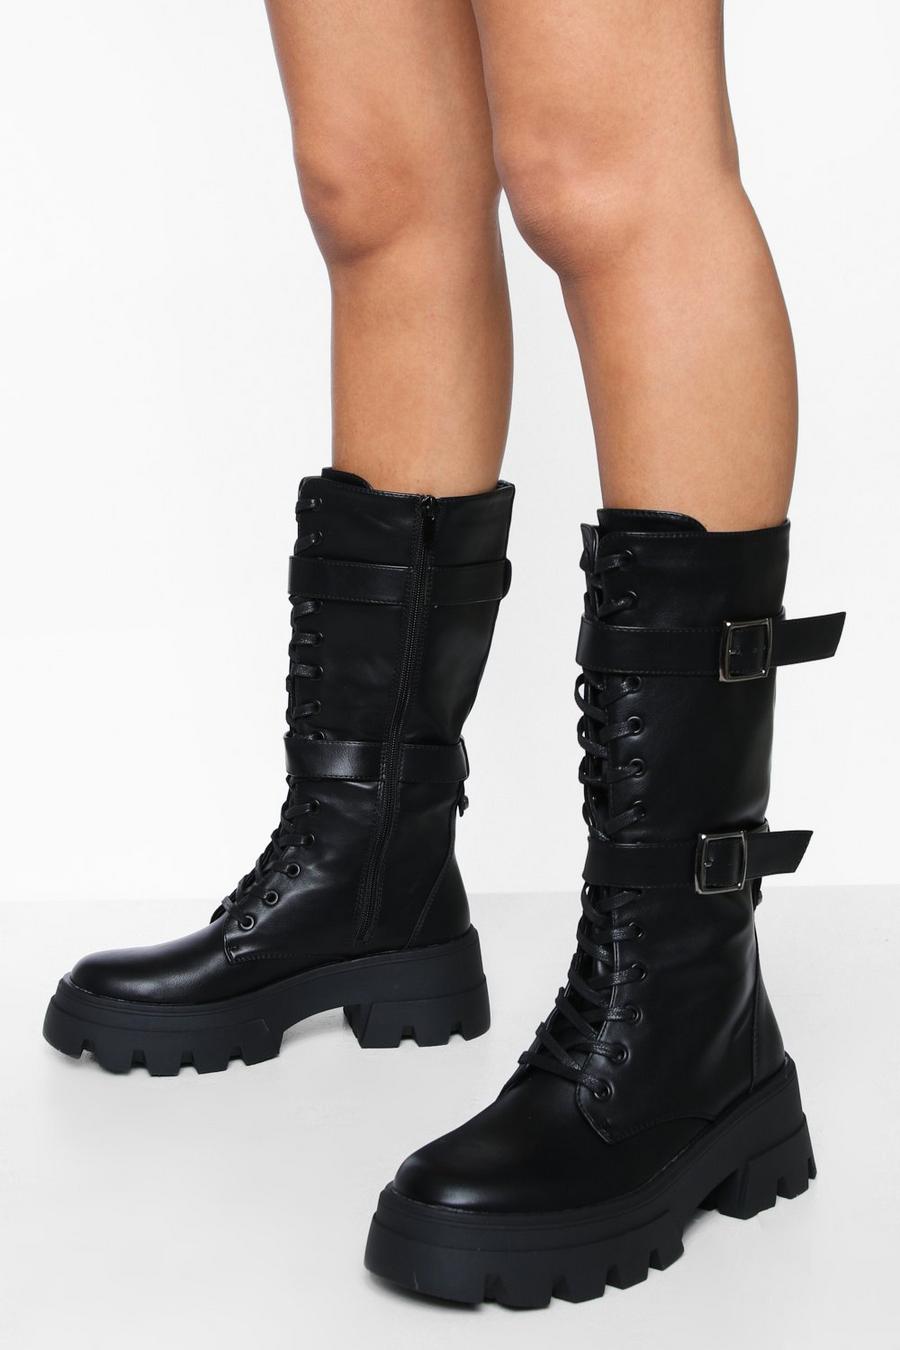 Black Double Buckle Calf High Boots image number 1